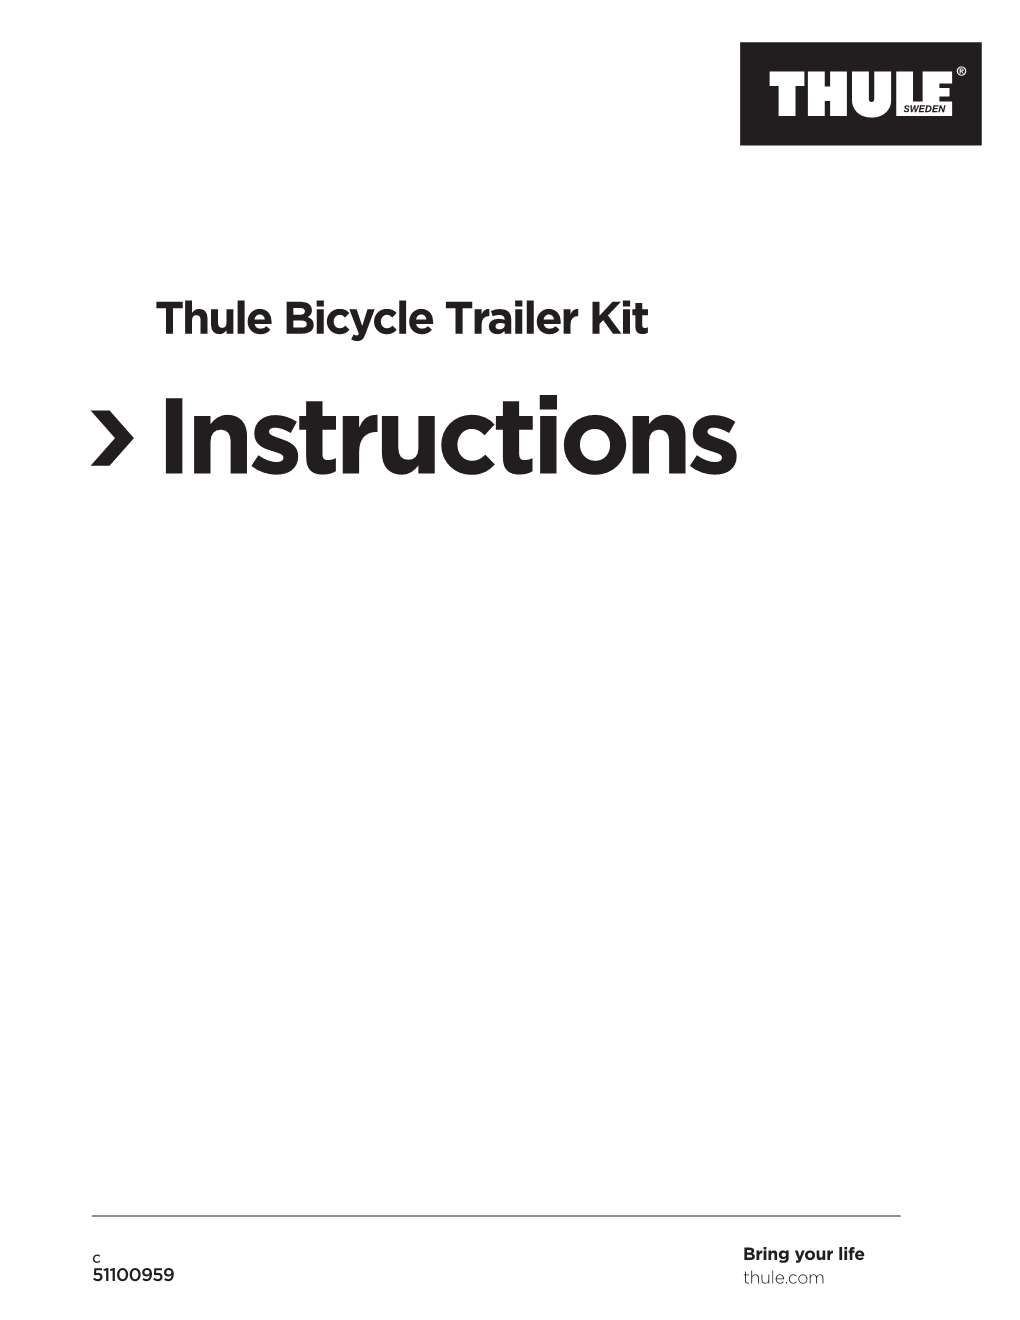 Thule Bicycle Trailer Kit Instructions